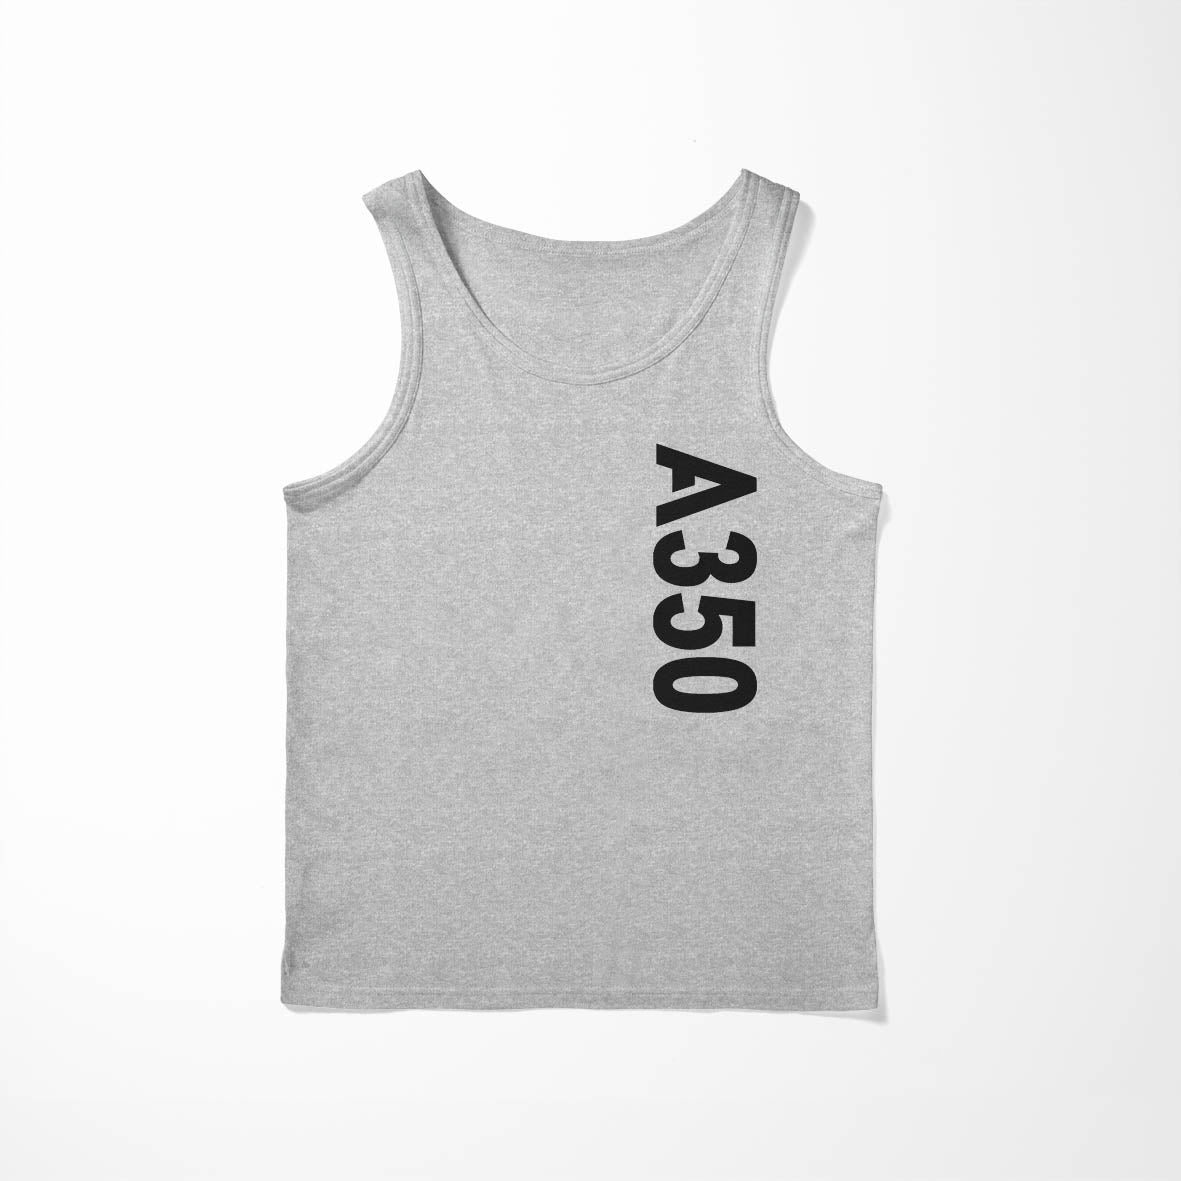 A350 Side Text Designed Tank Tops